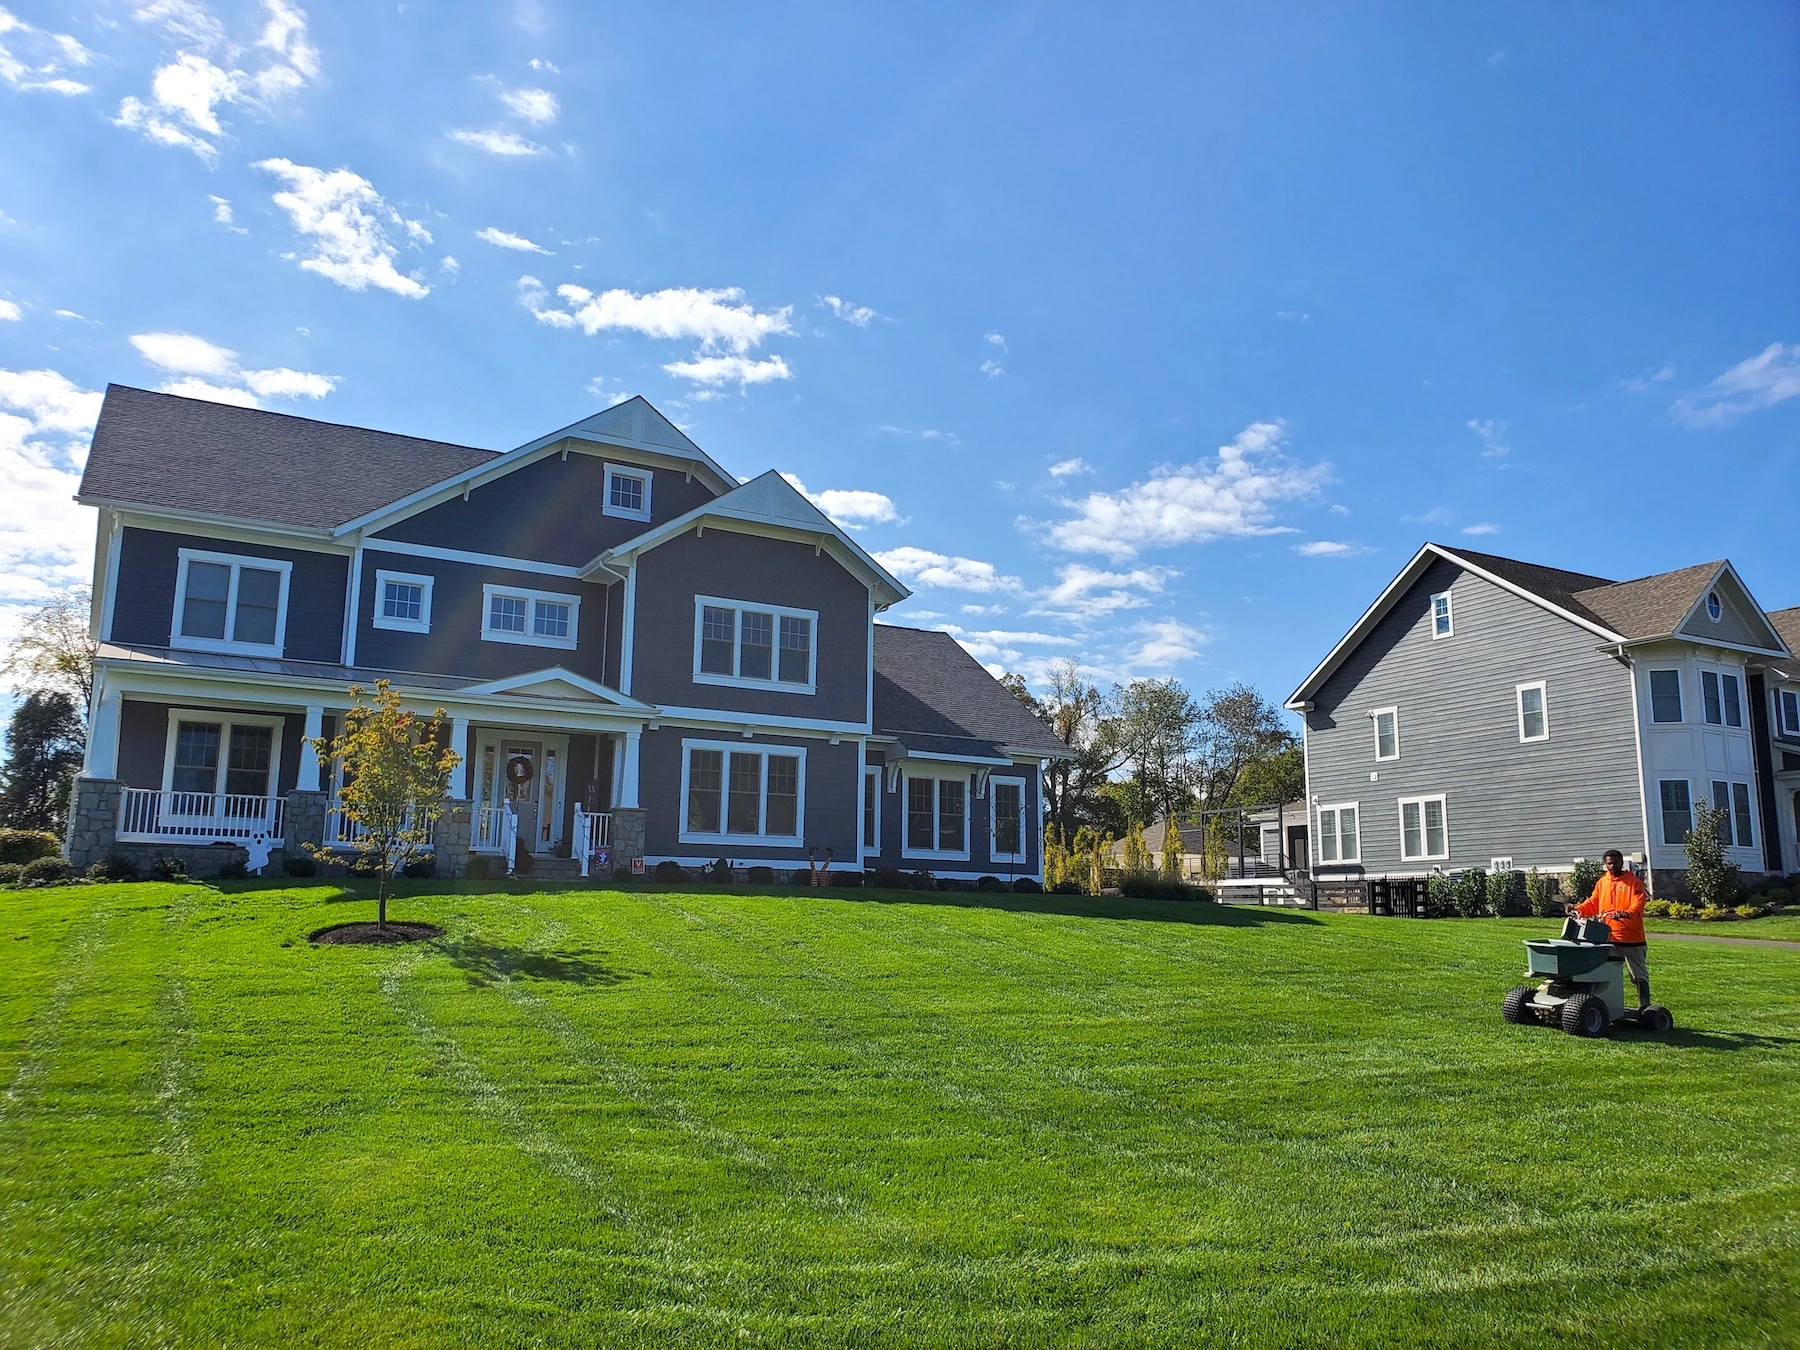 5 Tips to Fixing Your Ugly Lawn in Northern Virginia